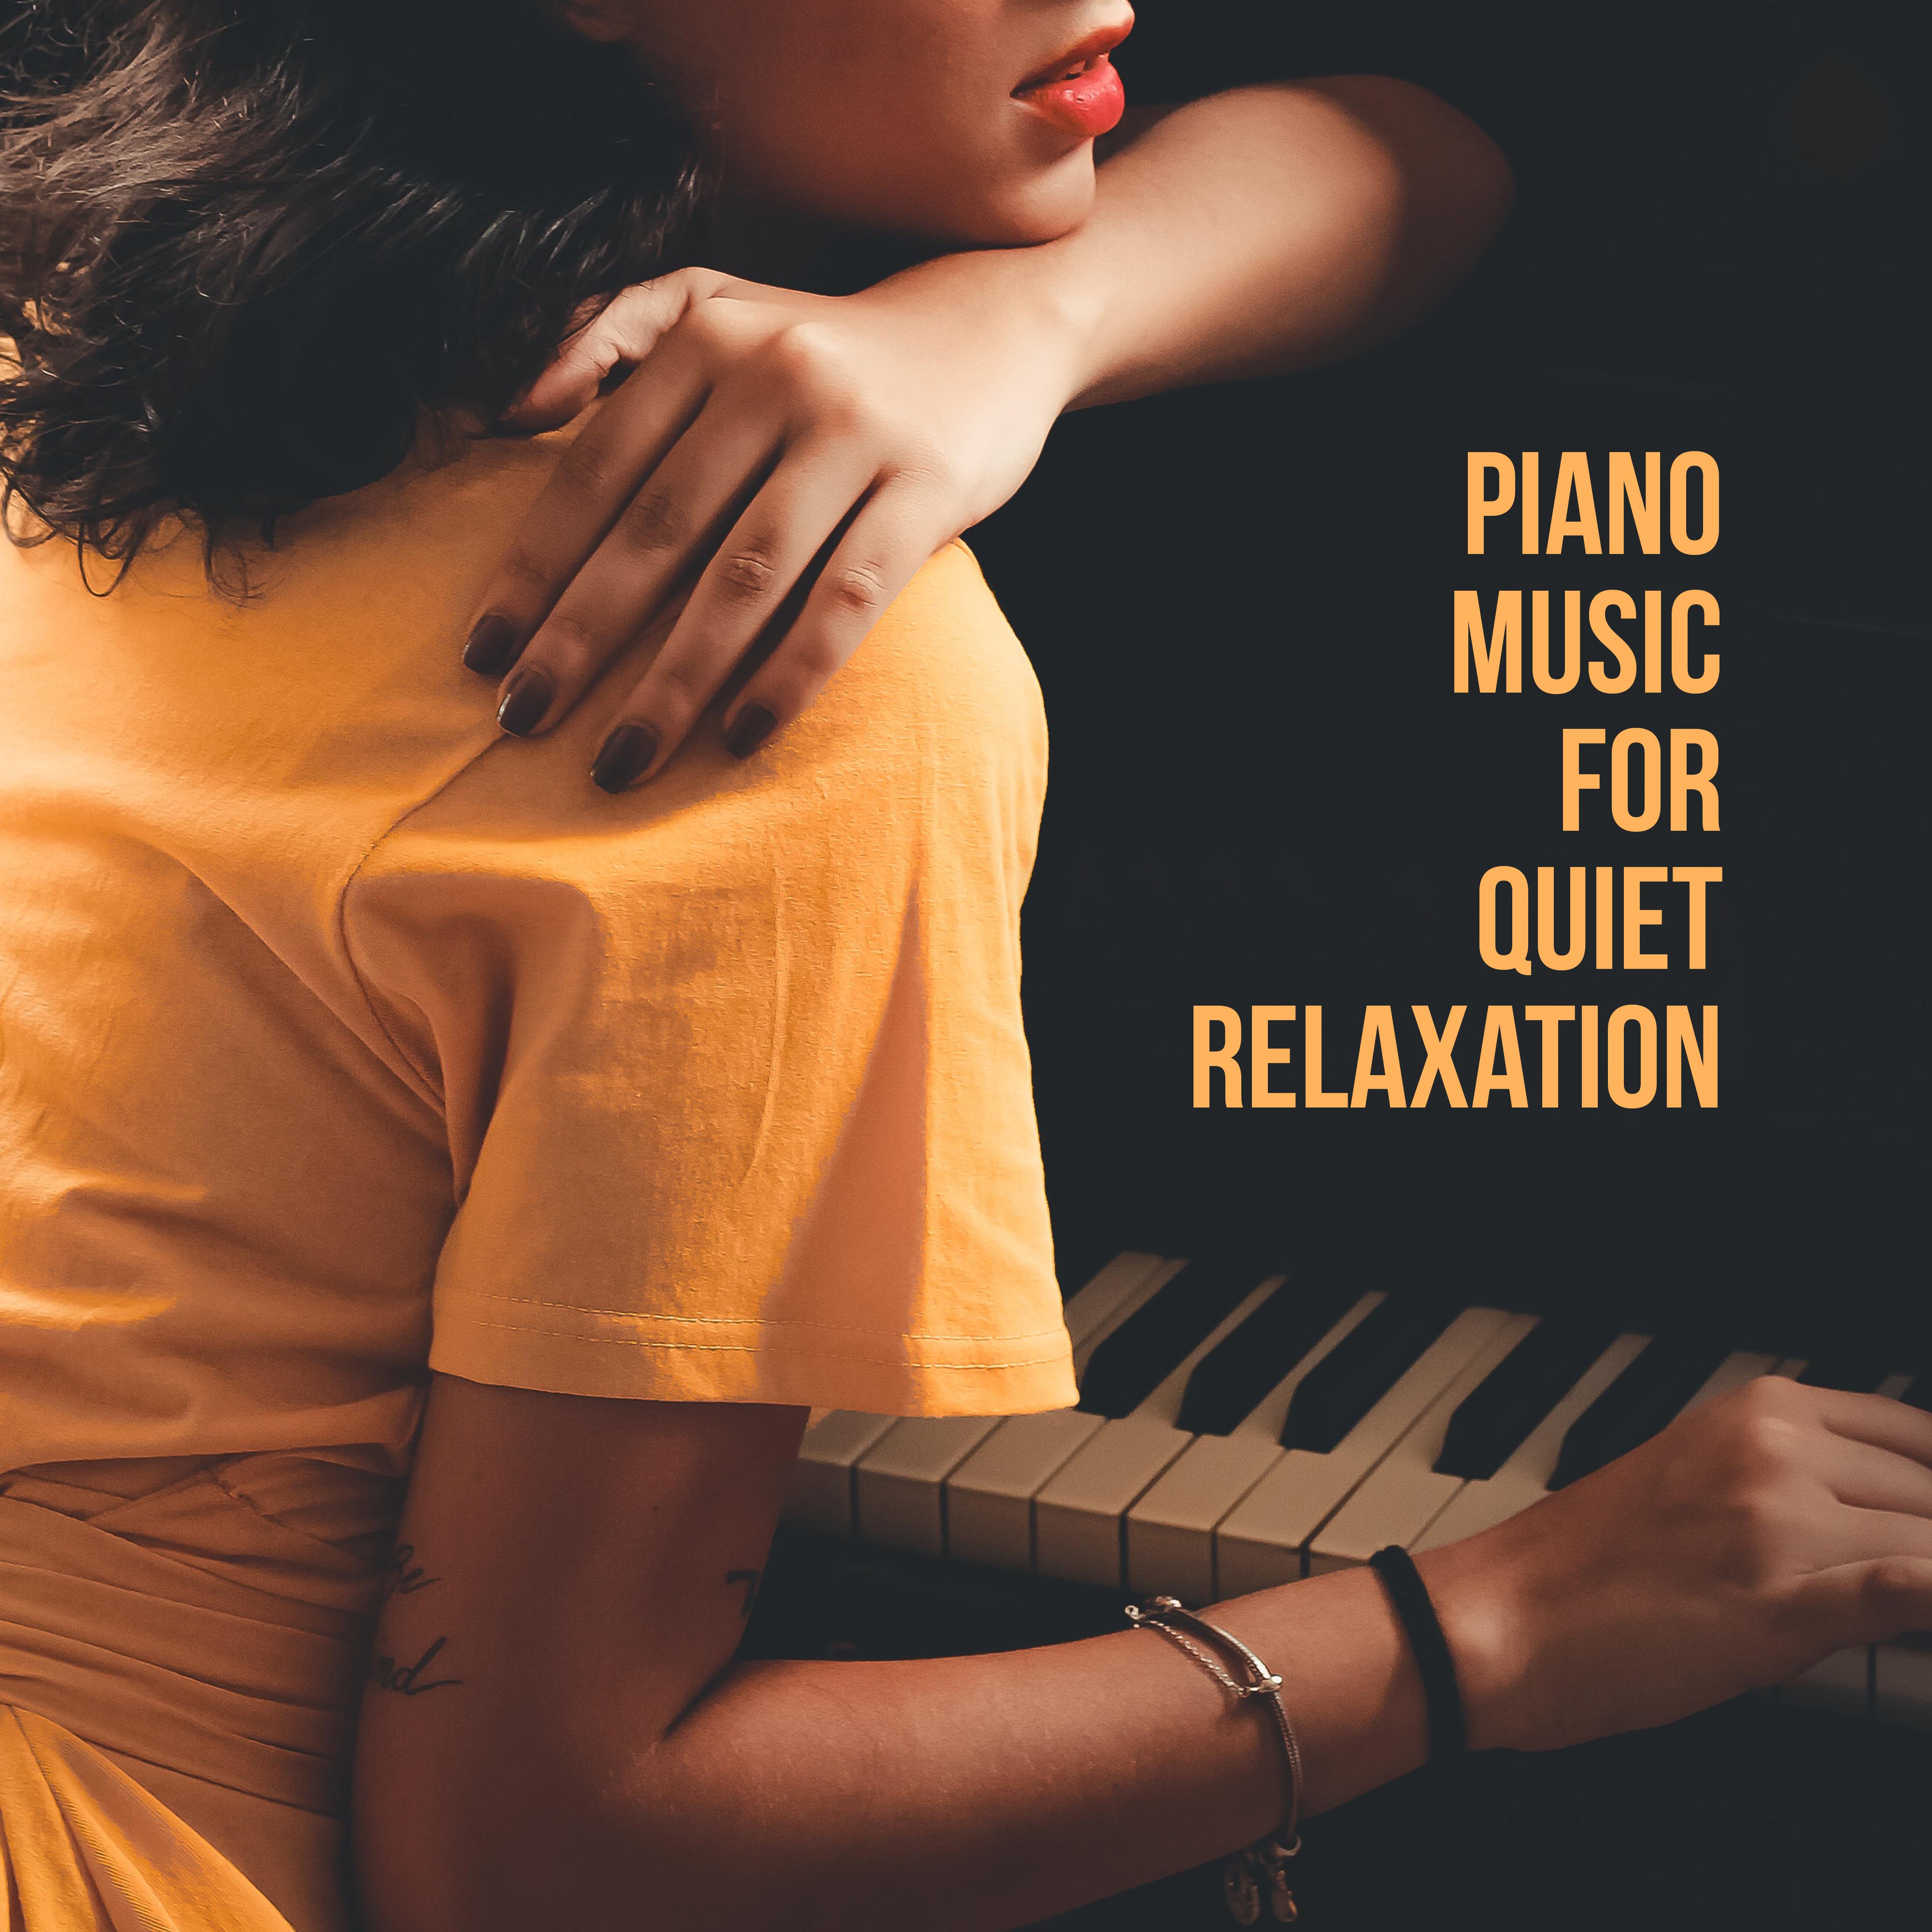 Piano Music for Quiet Relaxation: Instrumental Jazz Music Ambient, Jazz Coffee, Soft Jazz at Night, Stress Relief, Pillow Jazz, Smooth Music 2019